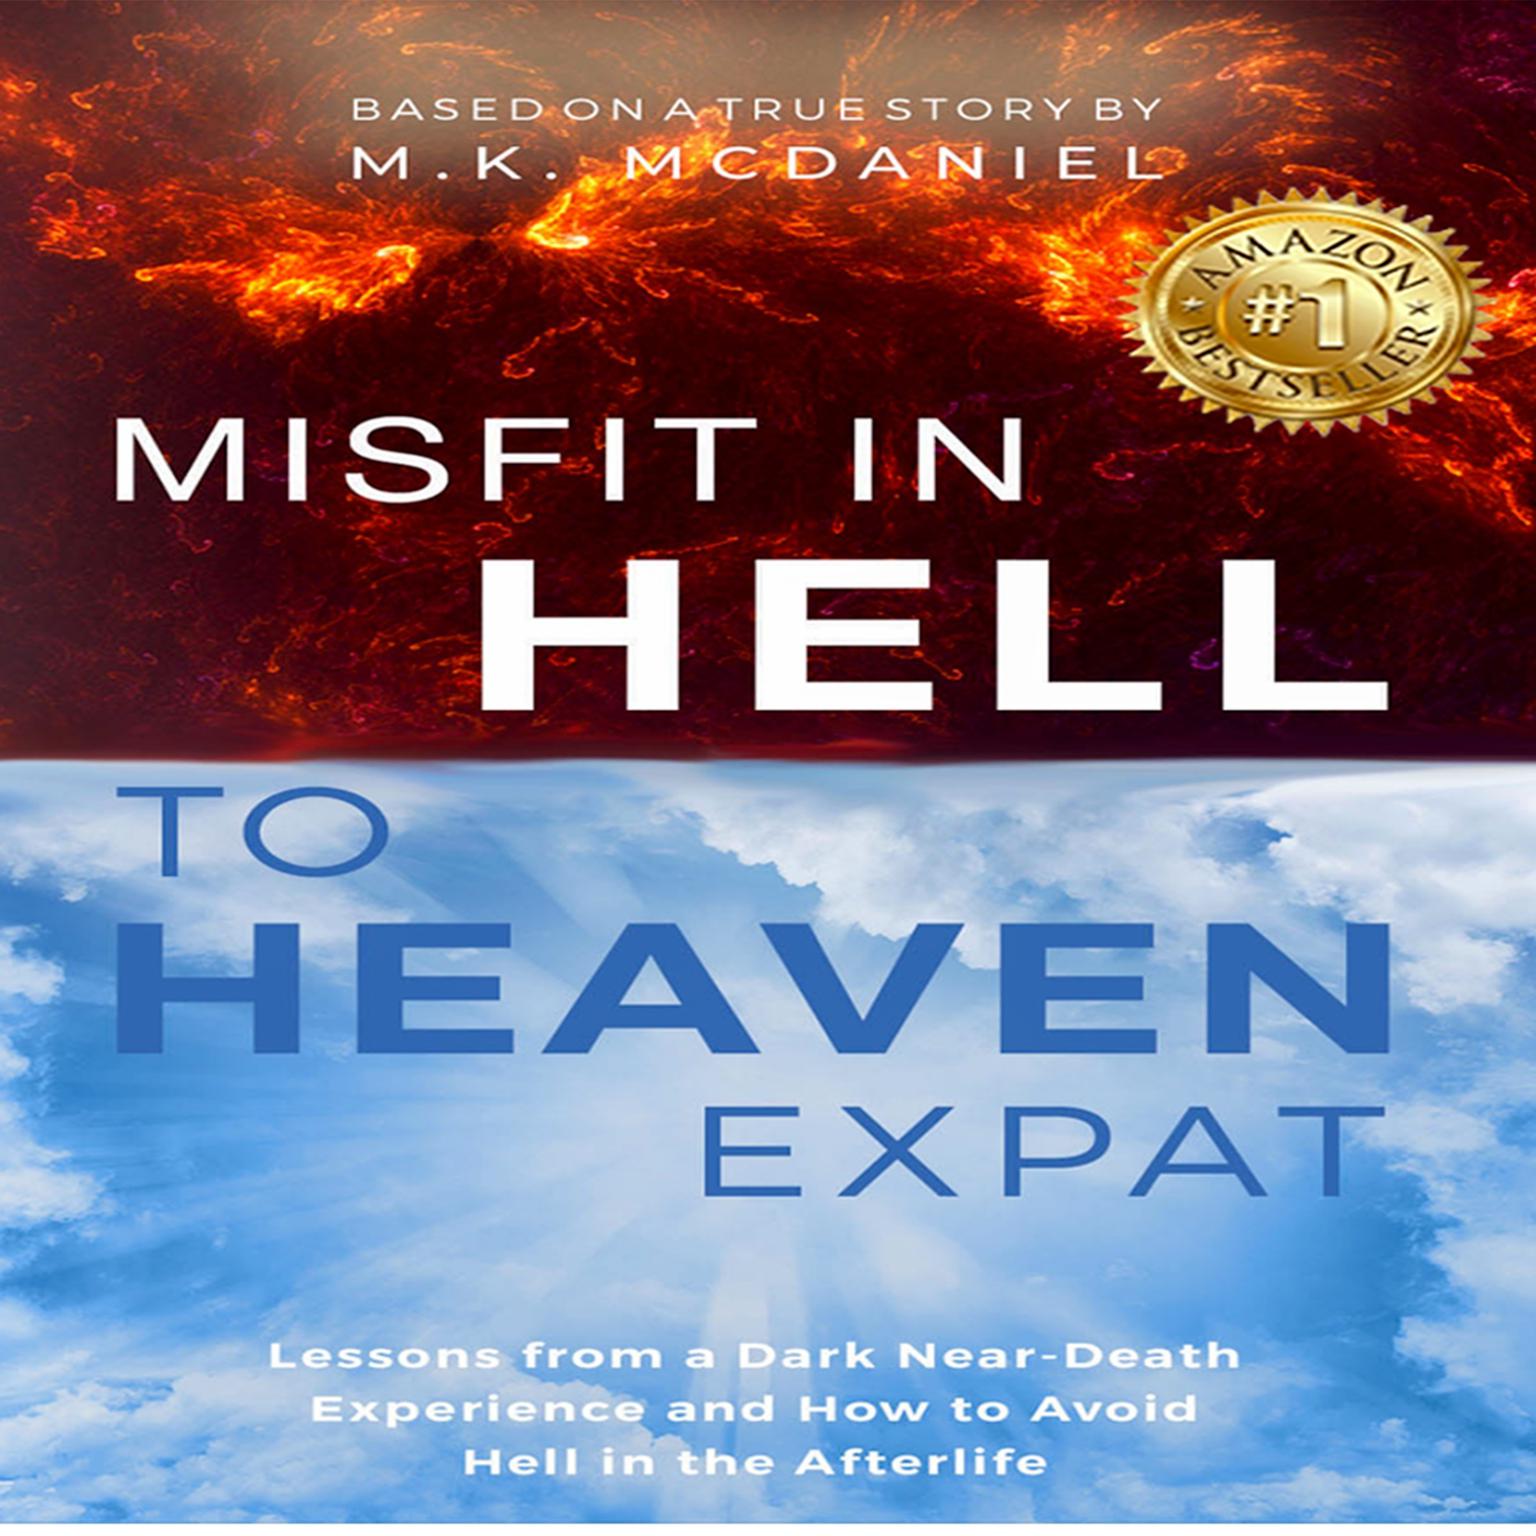 Misfit in Hell to Heaven Expat: Lessons from a Dark Near-Death Experience and How to Avoid Hell in the Afterlife Audiobook, by M.K. McDaniel